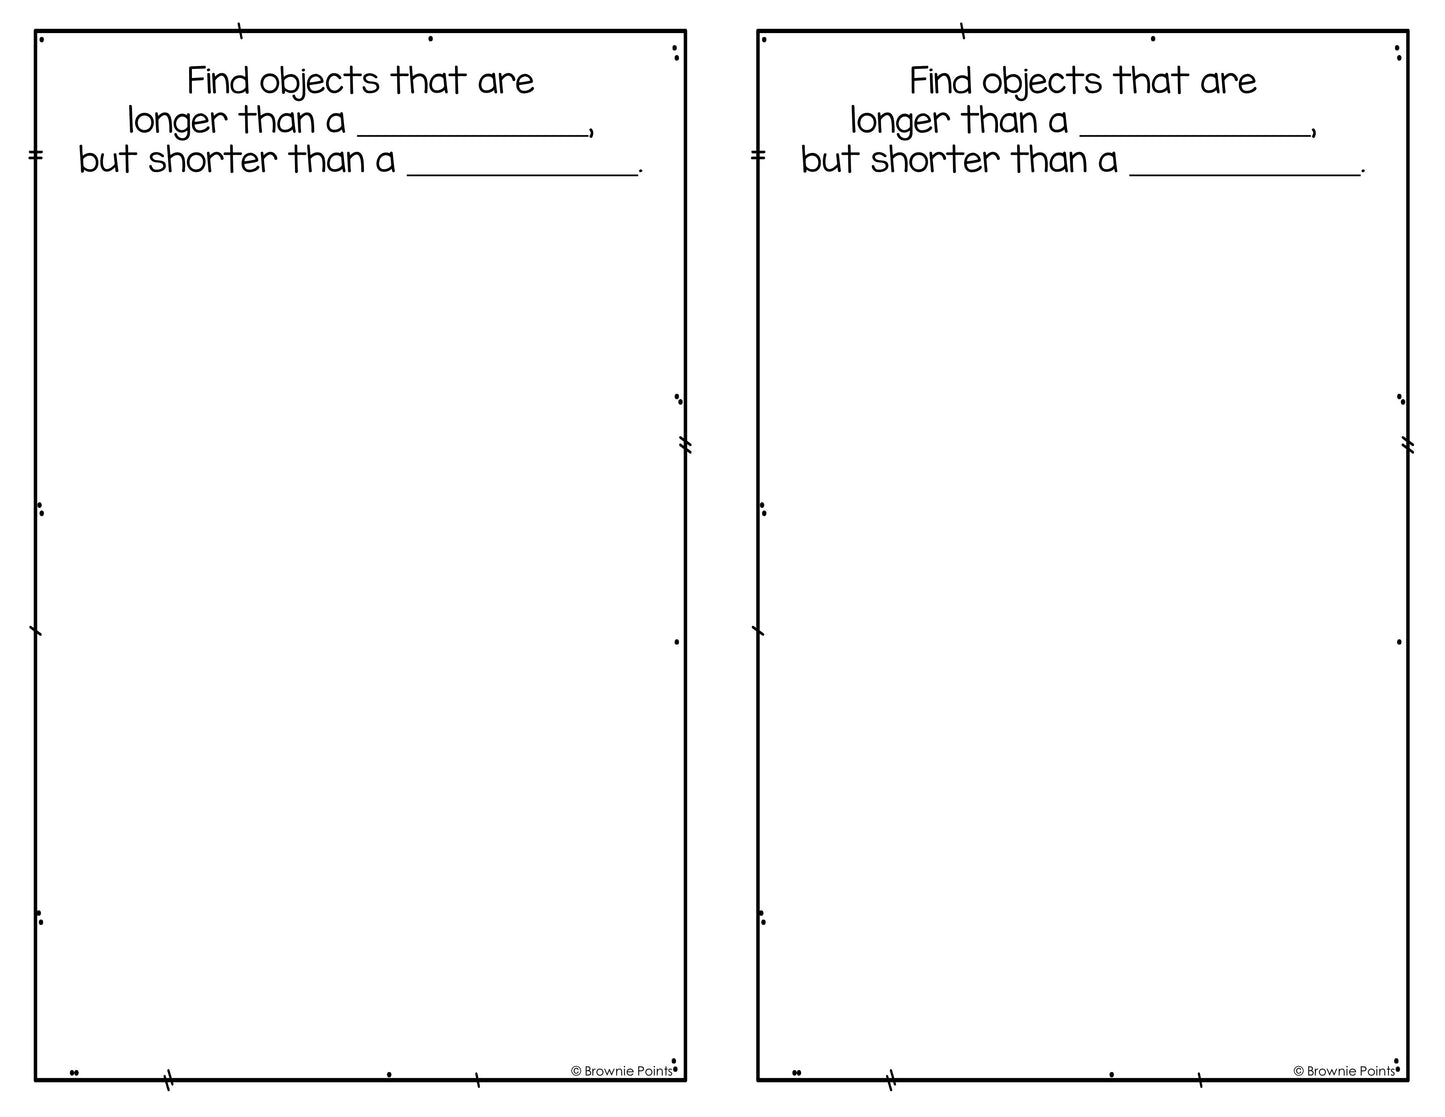 Open-Ended Math Questions - Length, Area & Perimeter